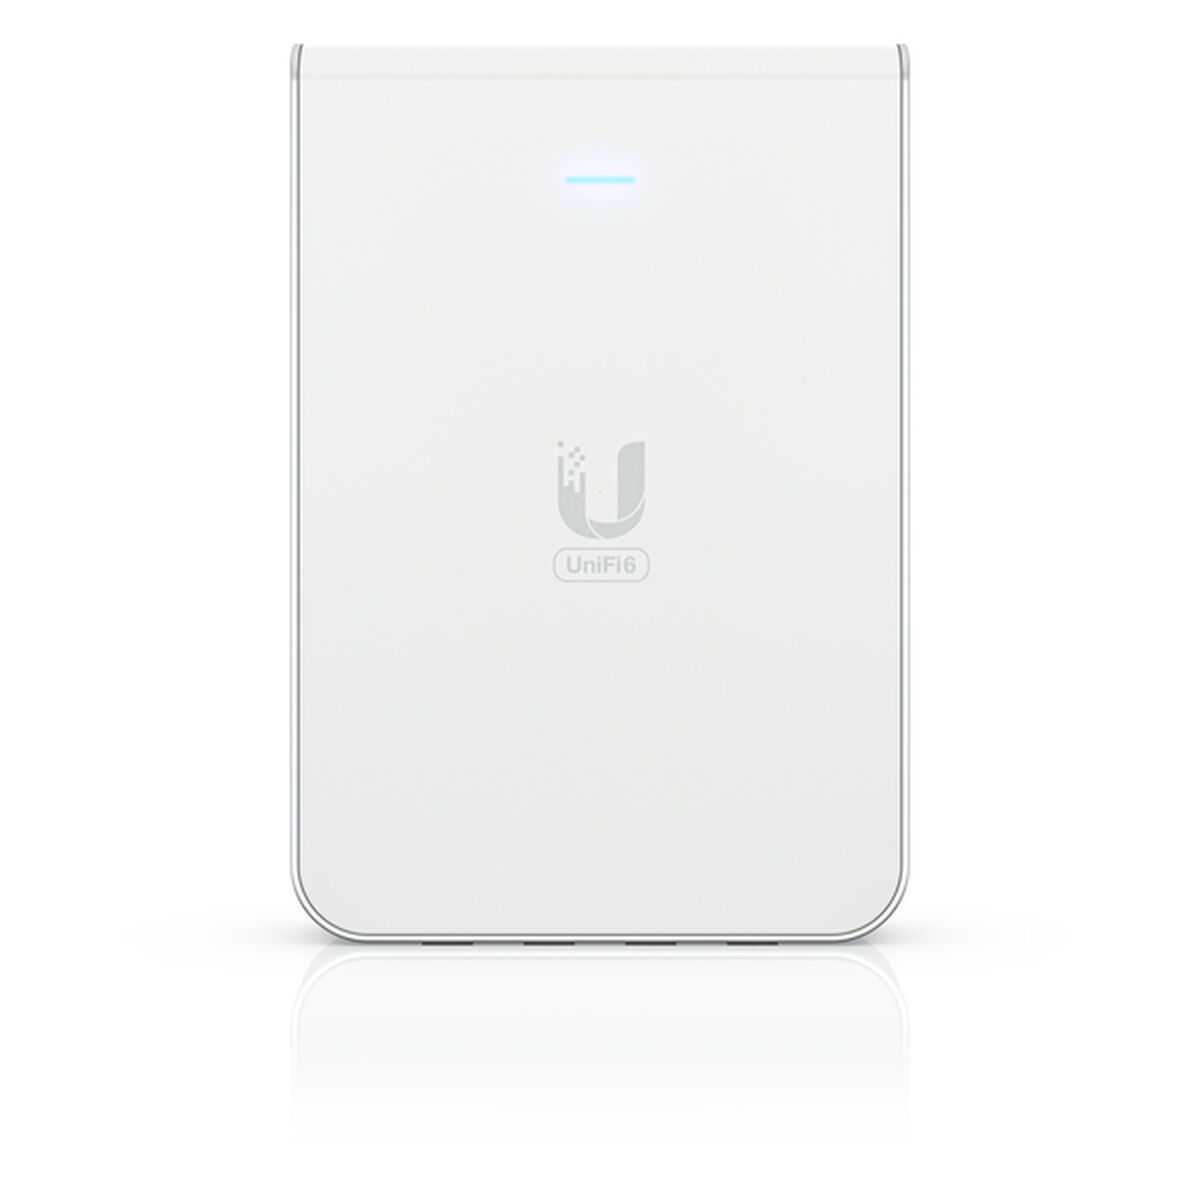 Wi-Fi Repeater + Router + Access Point UBIQUITI White